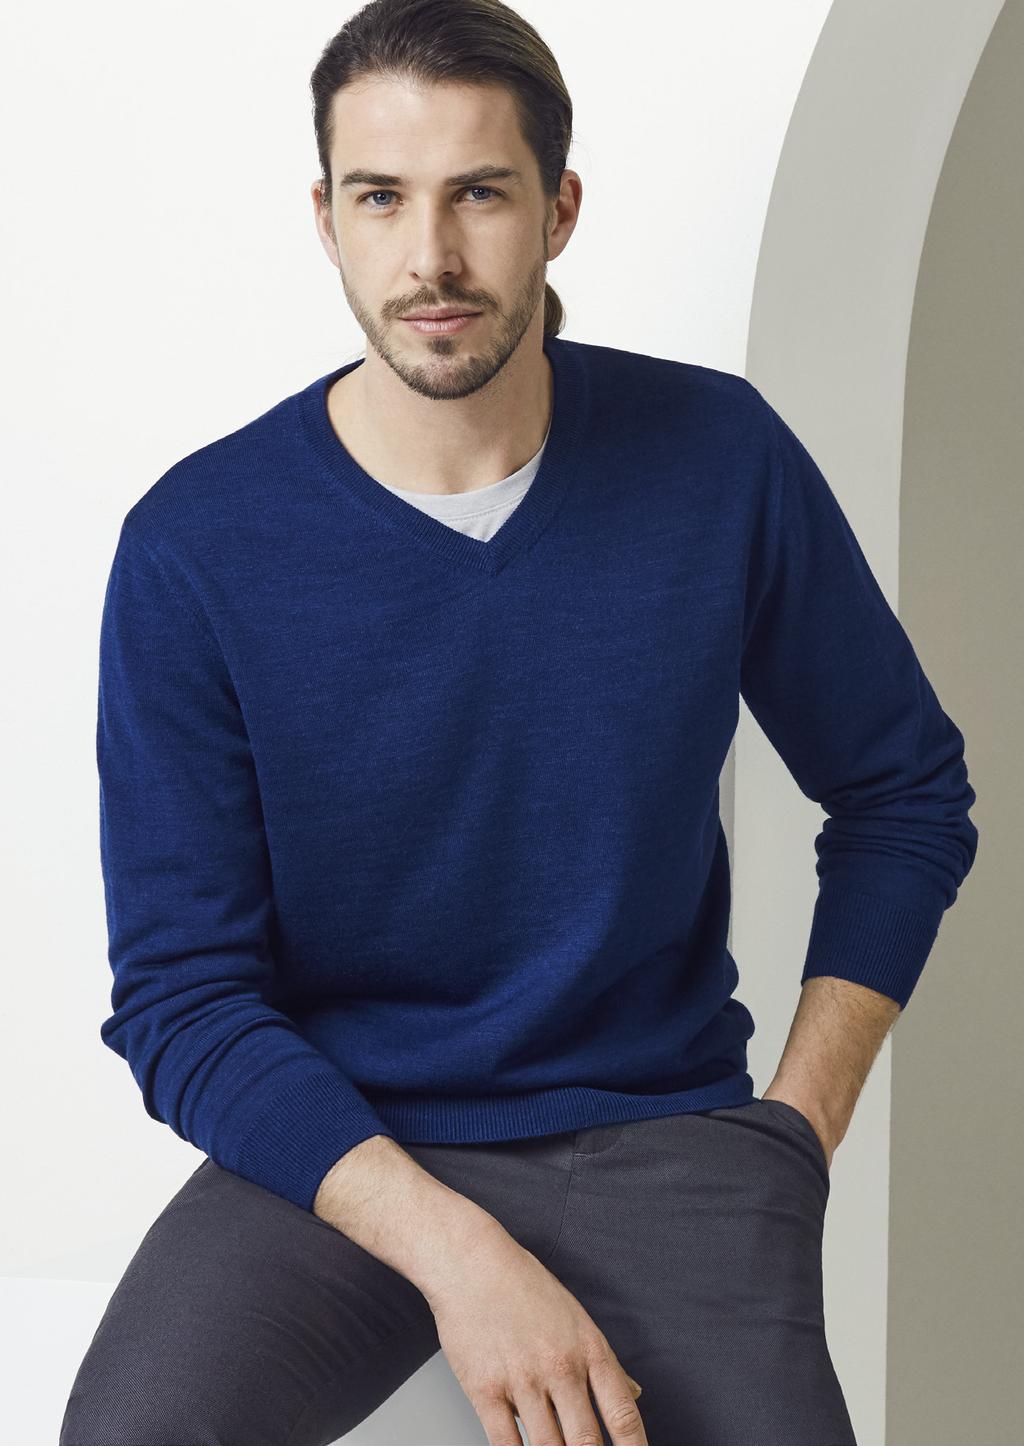 CASUAL CITY_ How we wear it Layer our AERO T-shirt under our ROMA knitwear for a clean,